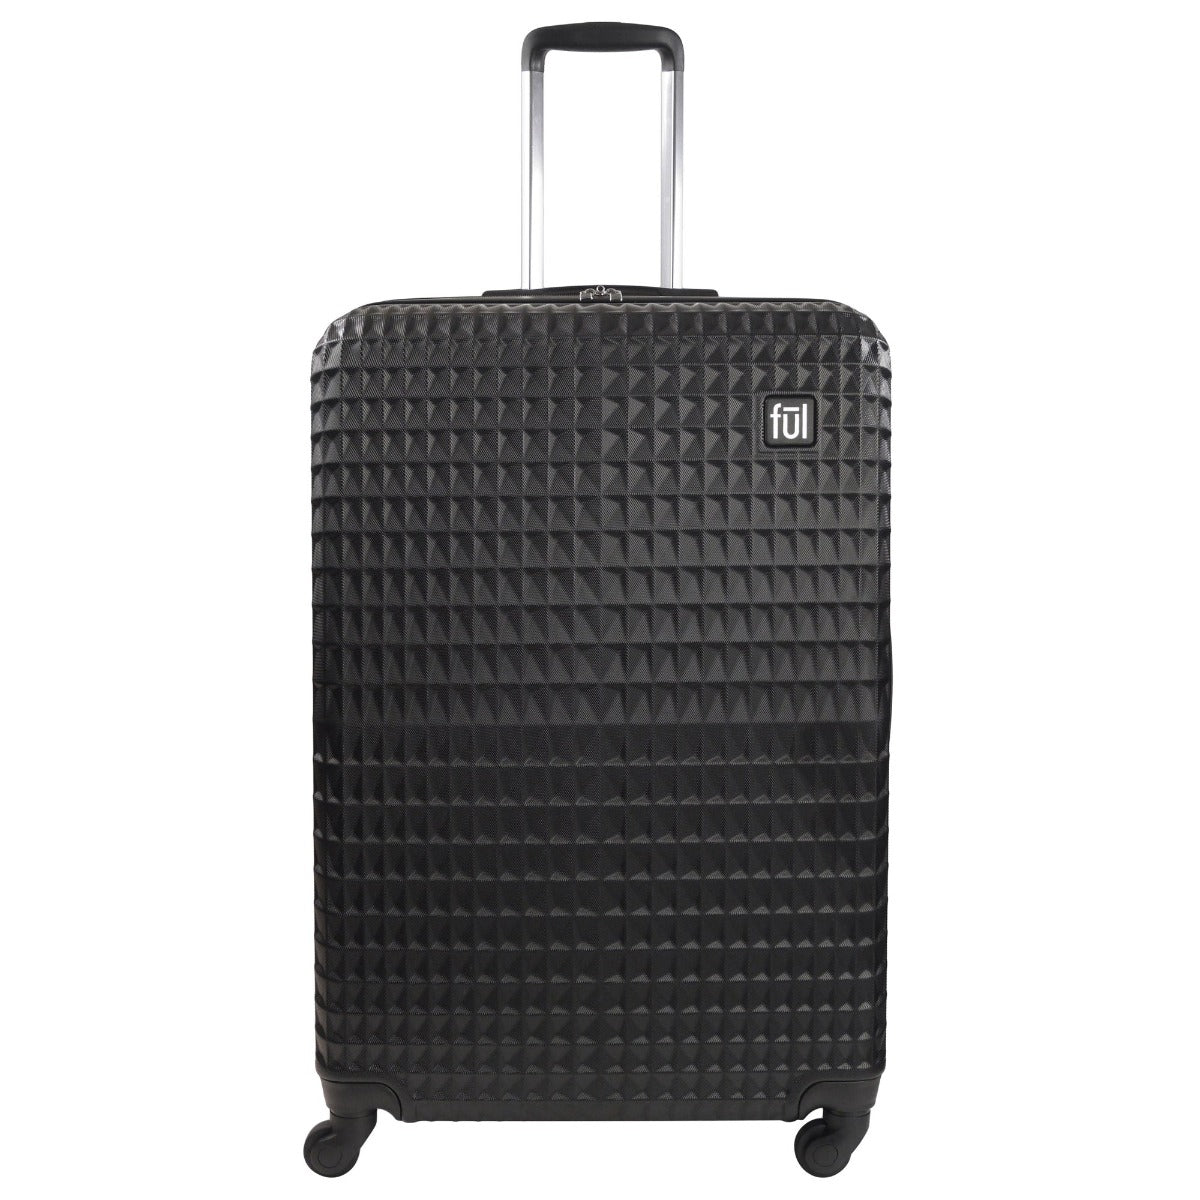 Ful Geo 31" hard sided spinner suitcase luggage black large checked bag